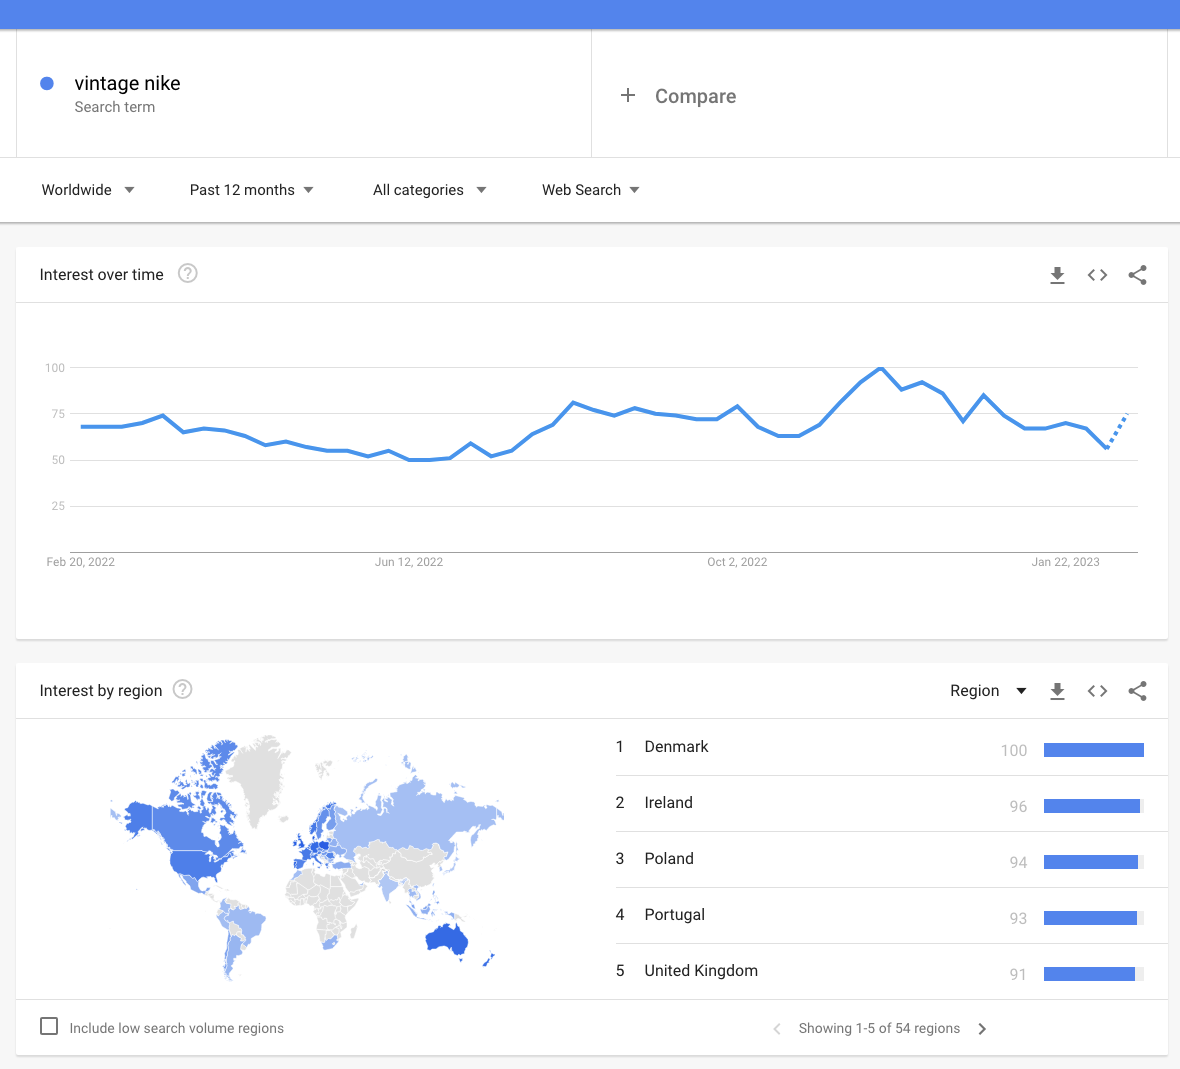 a screenshot from google trends showcase the popularity of the 'vintage nike' keyword